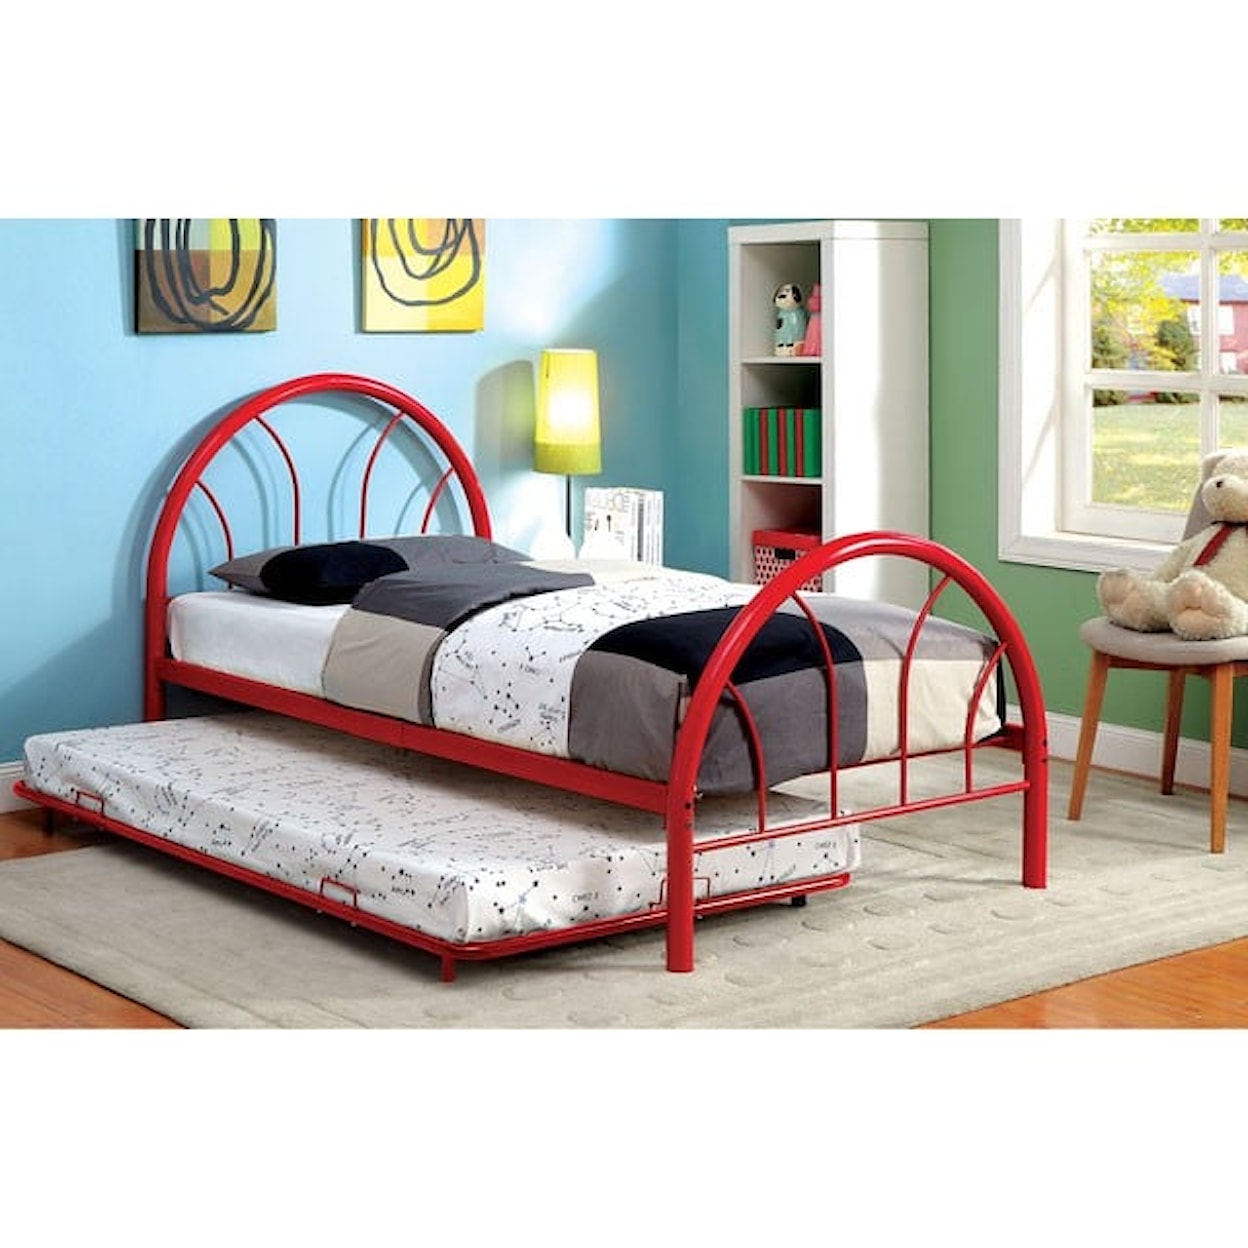 Furniture of America Rainbow Youth Full Bed with Trundle